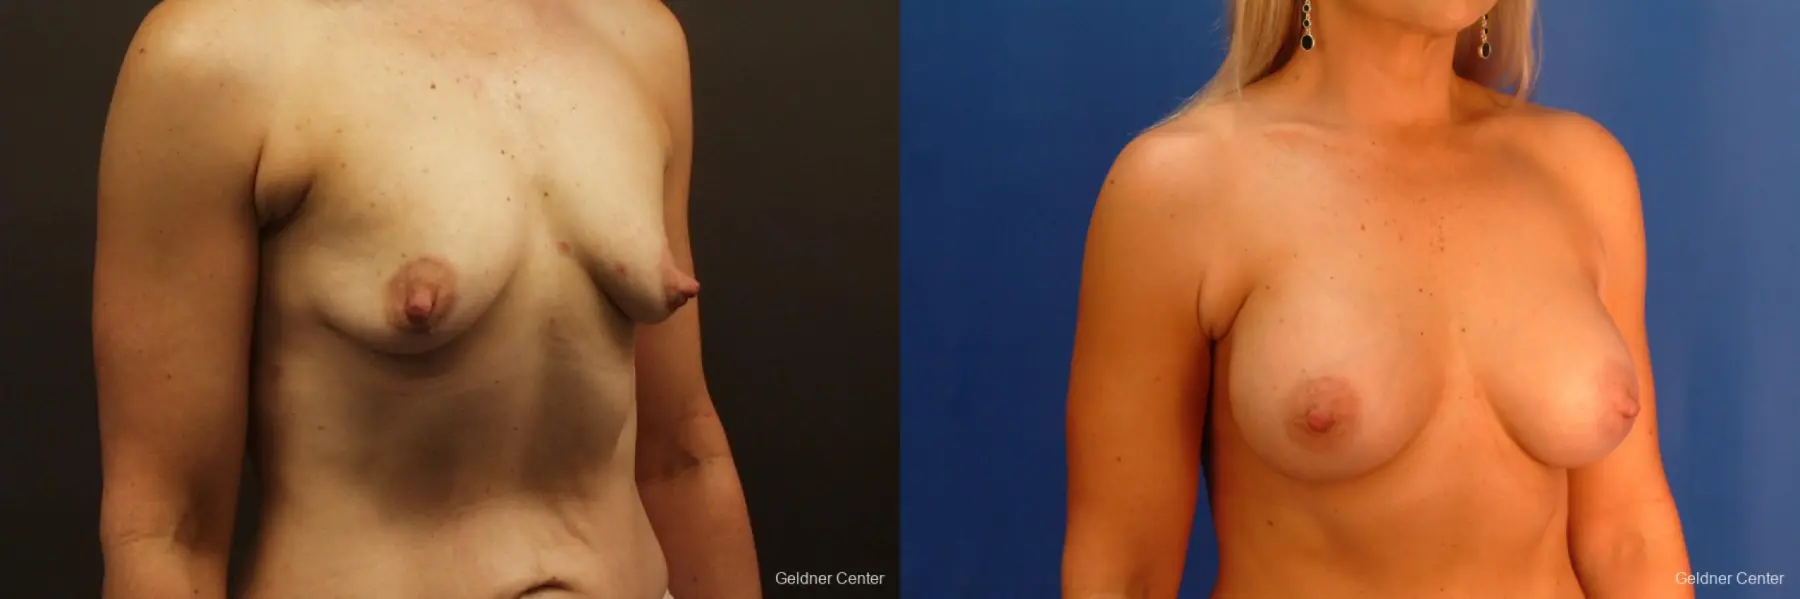 Breast Augmentation Hinsdale, Chicago 2632 - Before and After 3